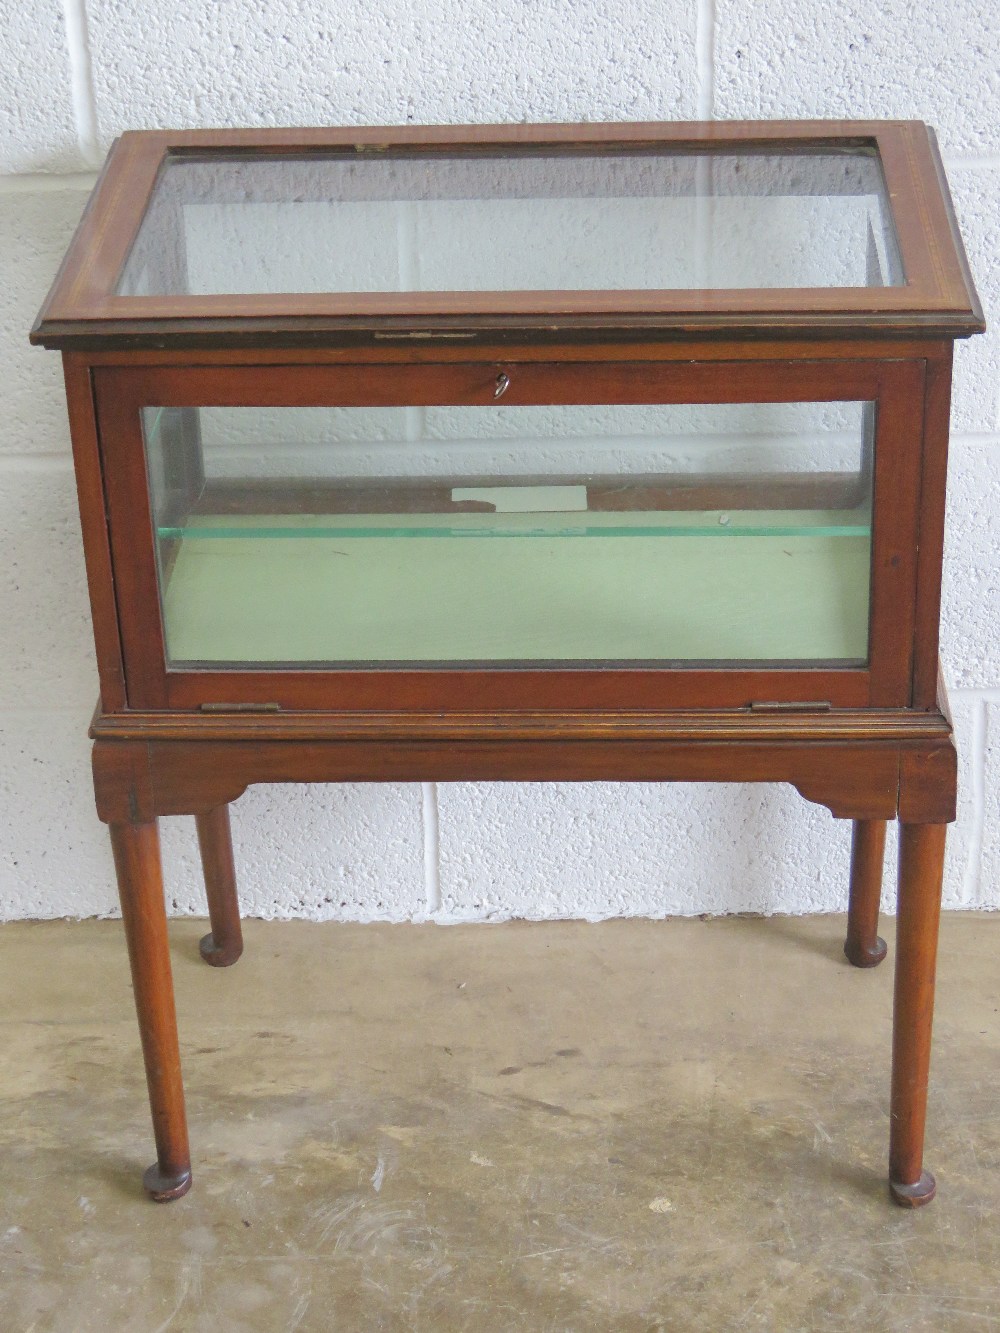 A delightful Edwardian glass and mahogany bijouterie table having satin lined base and single glass